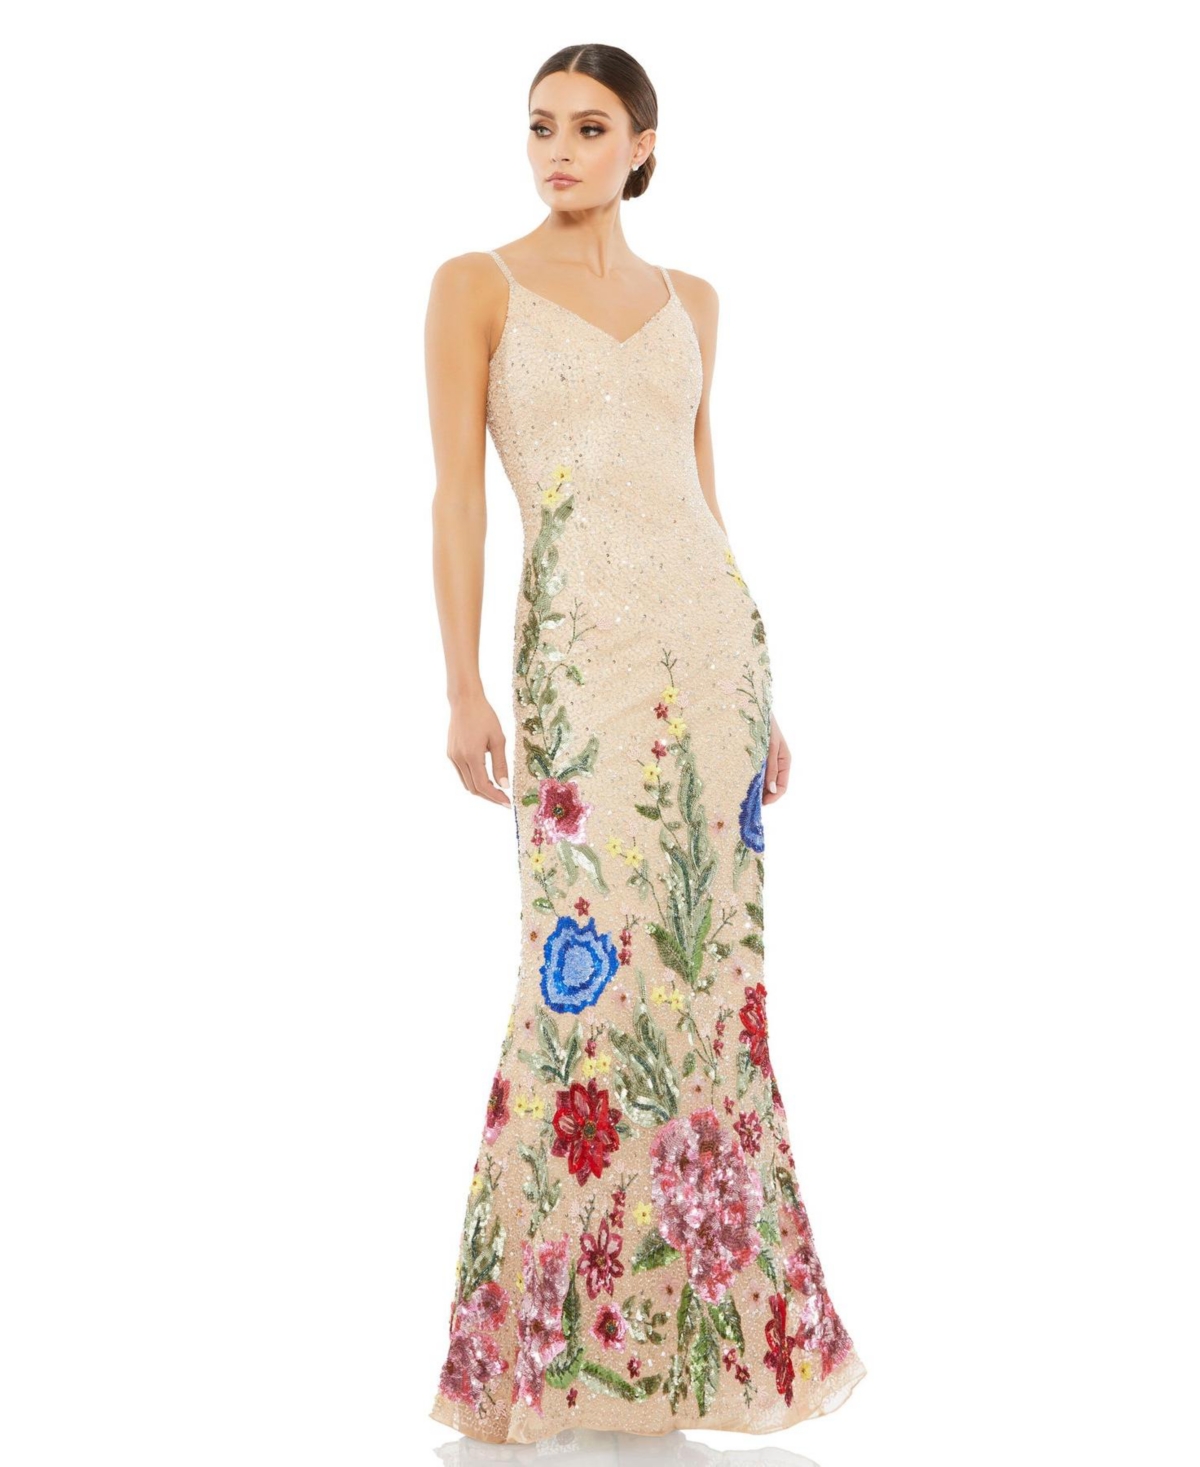 MAC DUGGAL WOMEN'S FLORAL EMBELLISHED SPAGHETTI STRAP GOWN